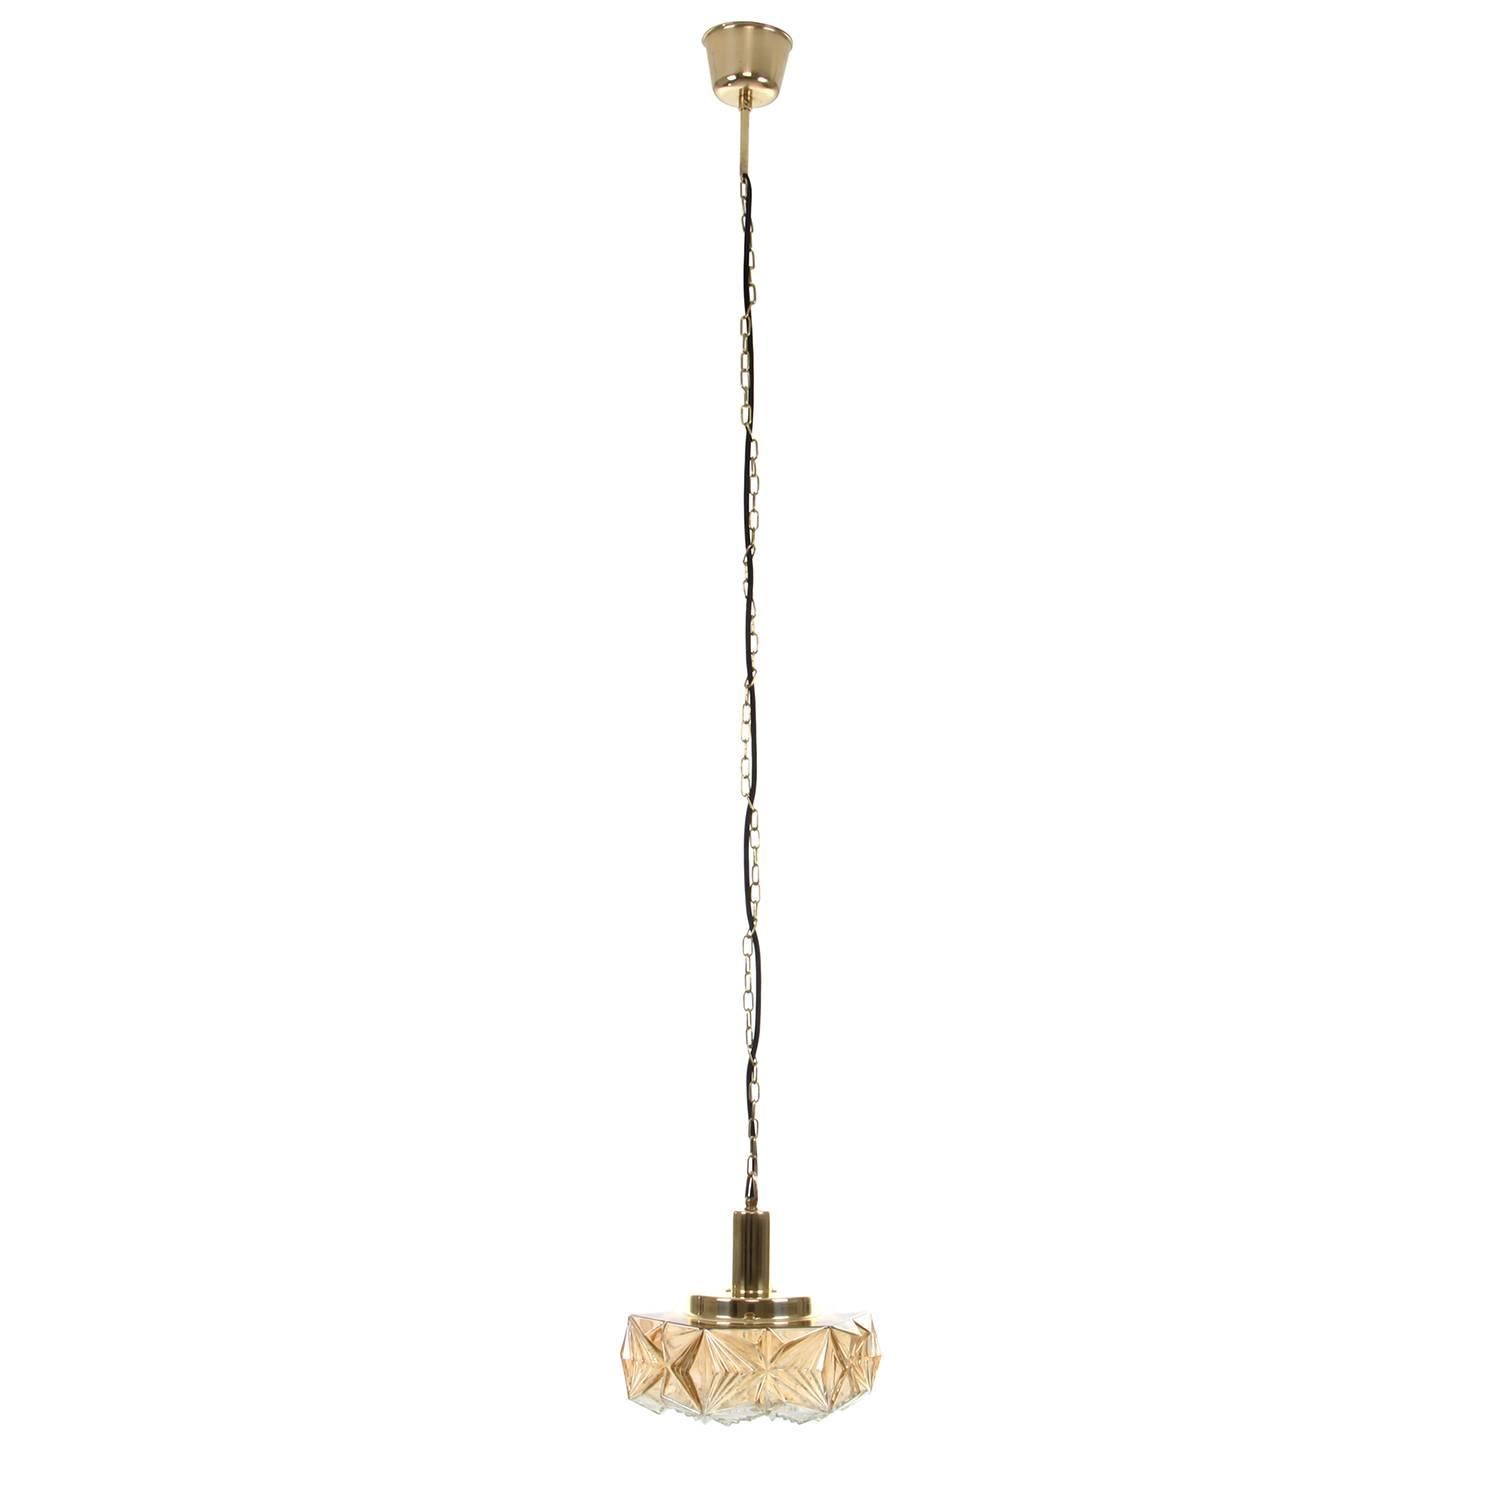 Pressed Glass Pendant, No. 36404 by Vitrika, 1960s, Vintage Glass and Brass Lamp 1